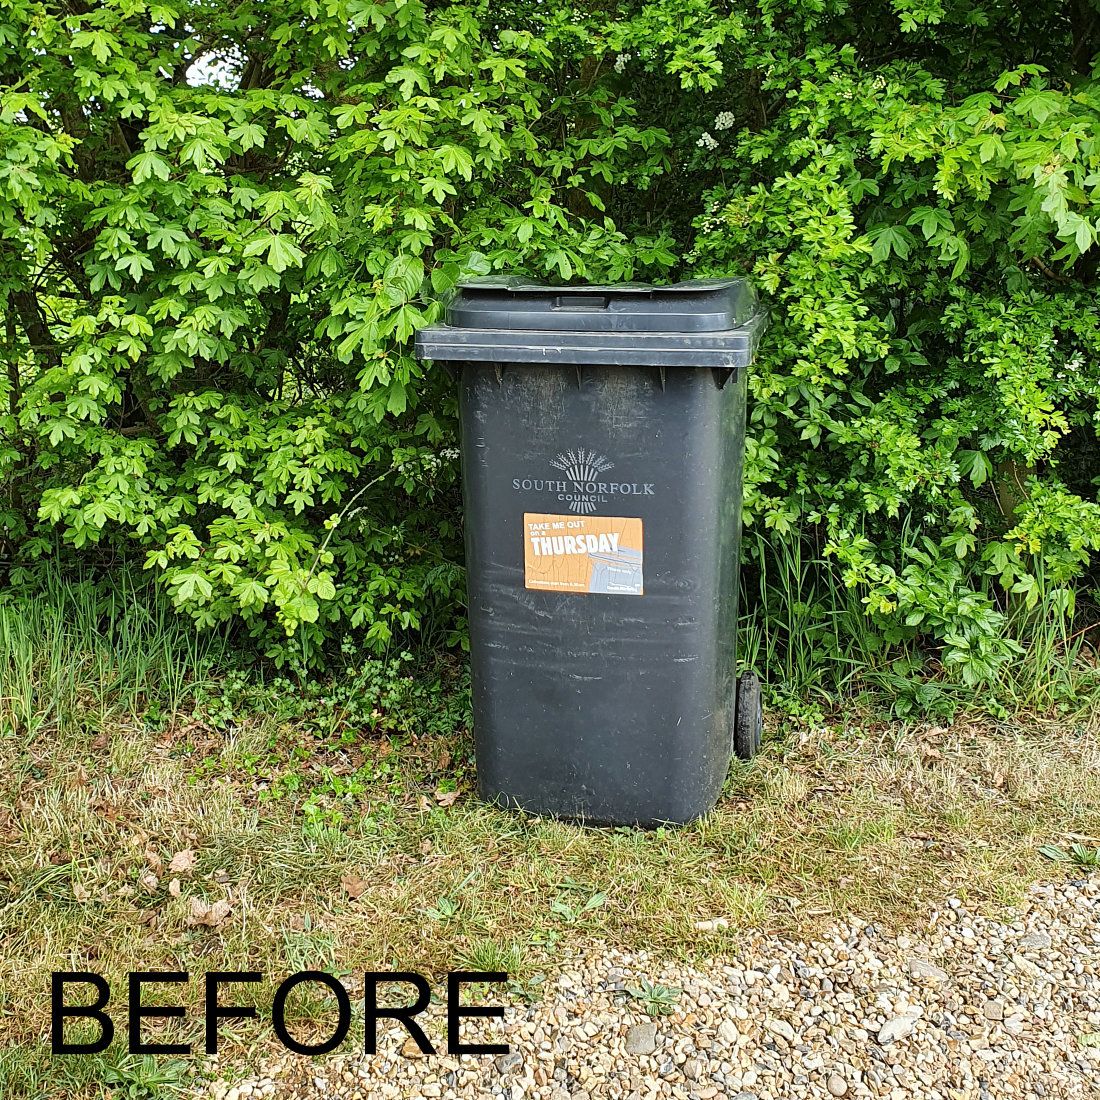  Refuse Bin before cover up with Artificial Maple Leaf on Expanding Willow Trellis